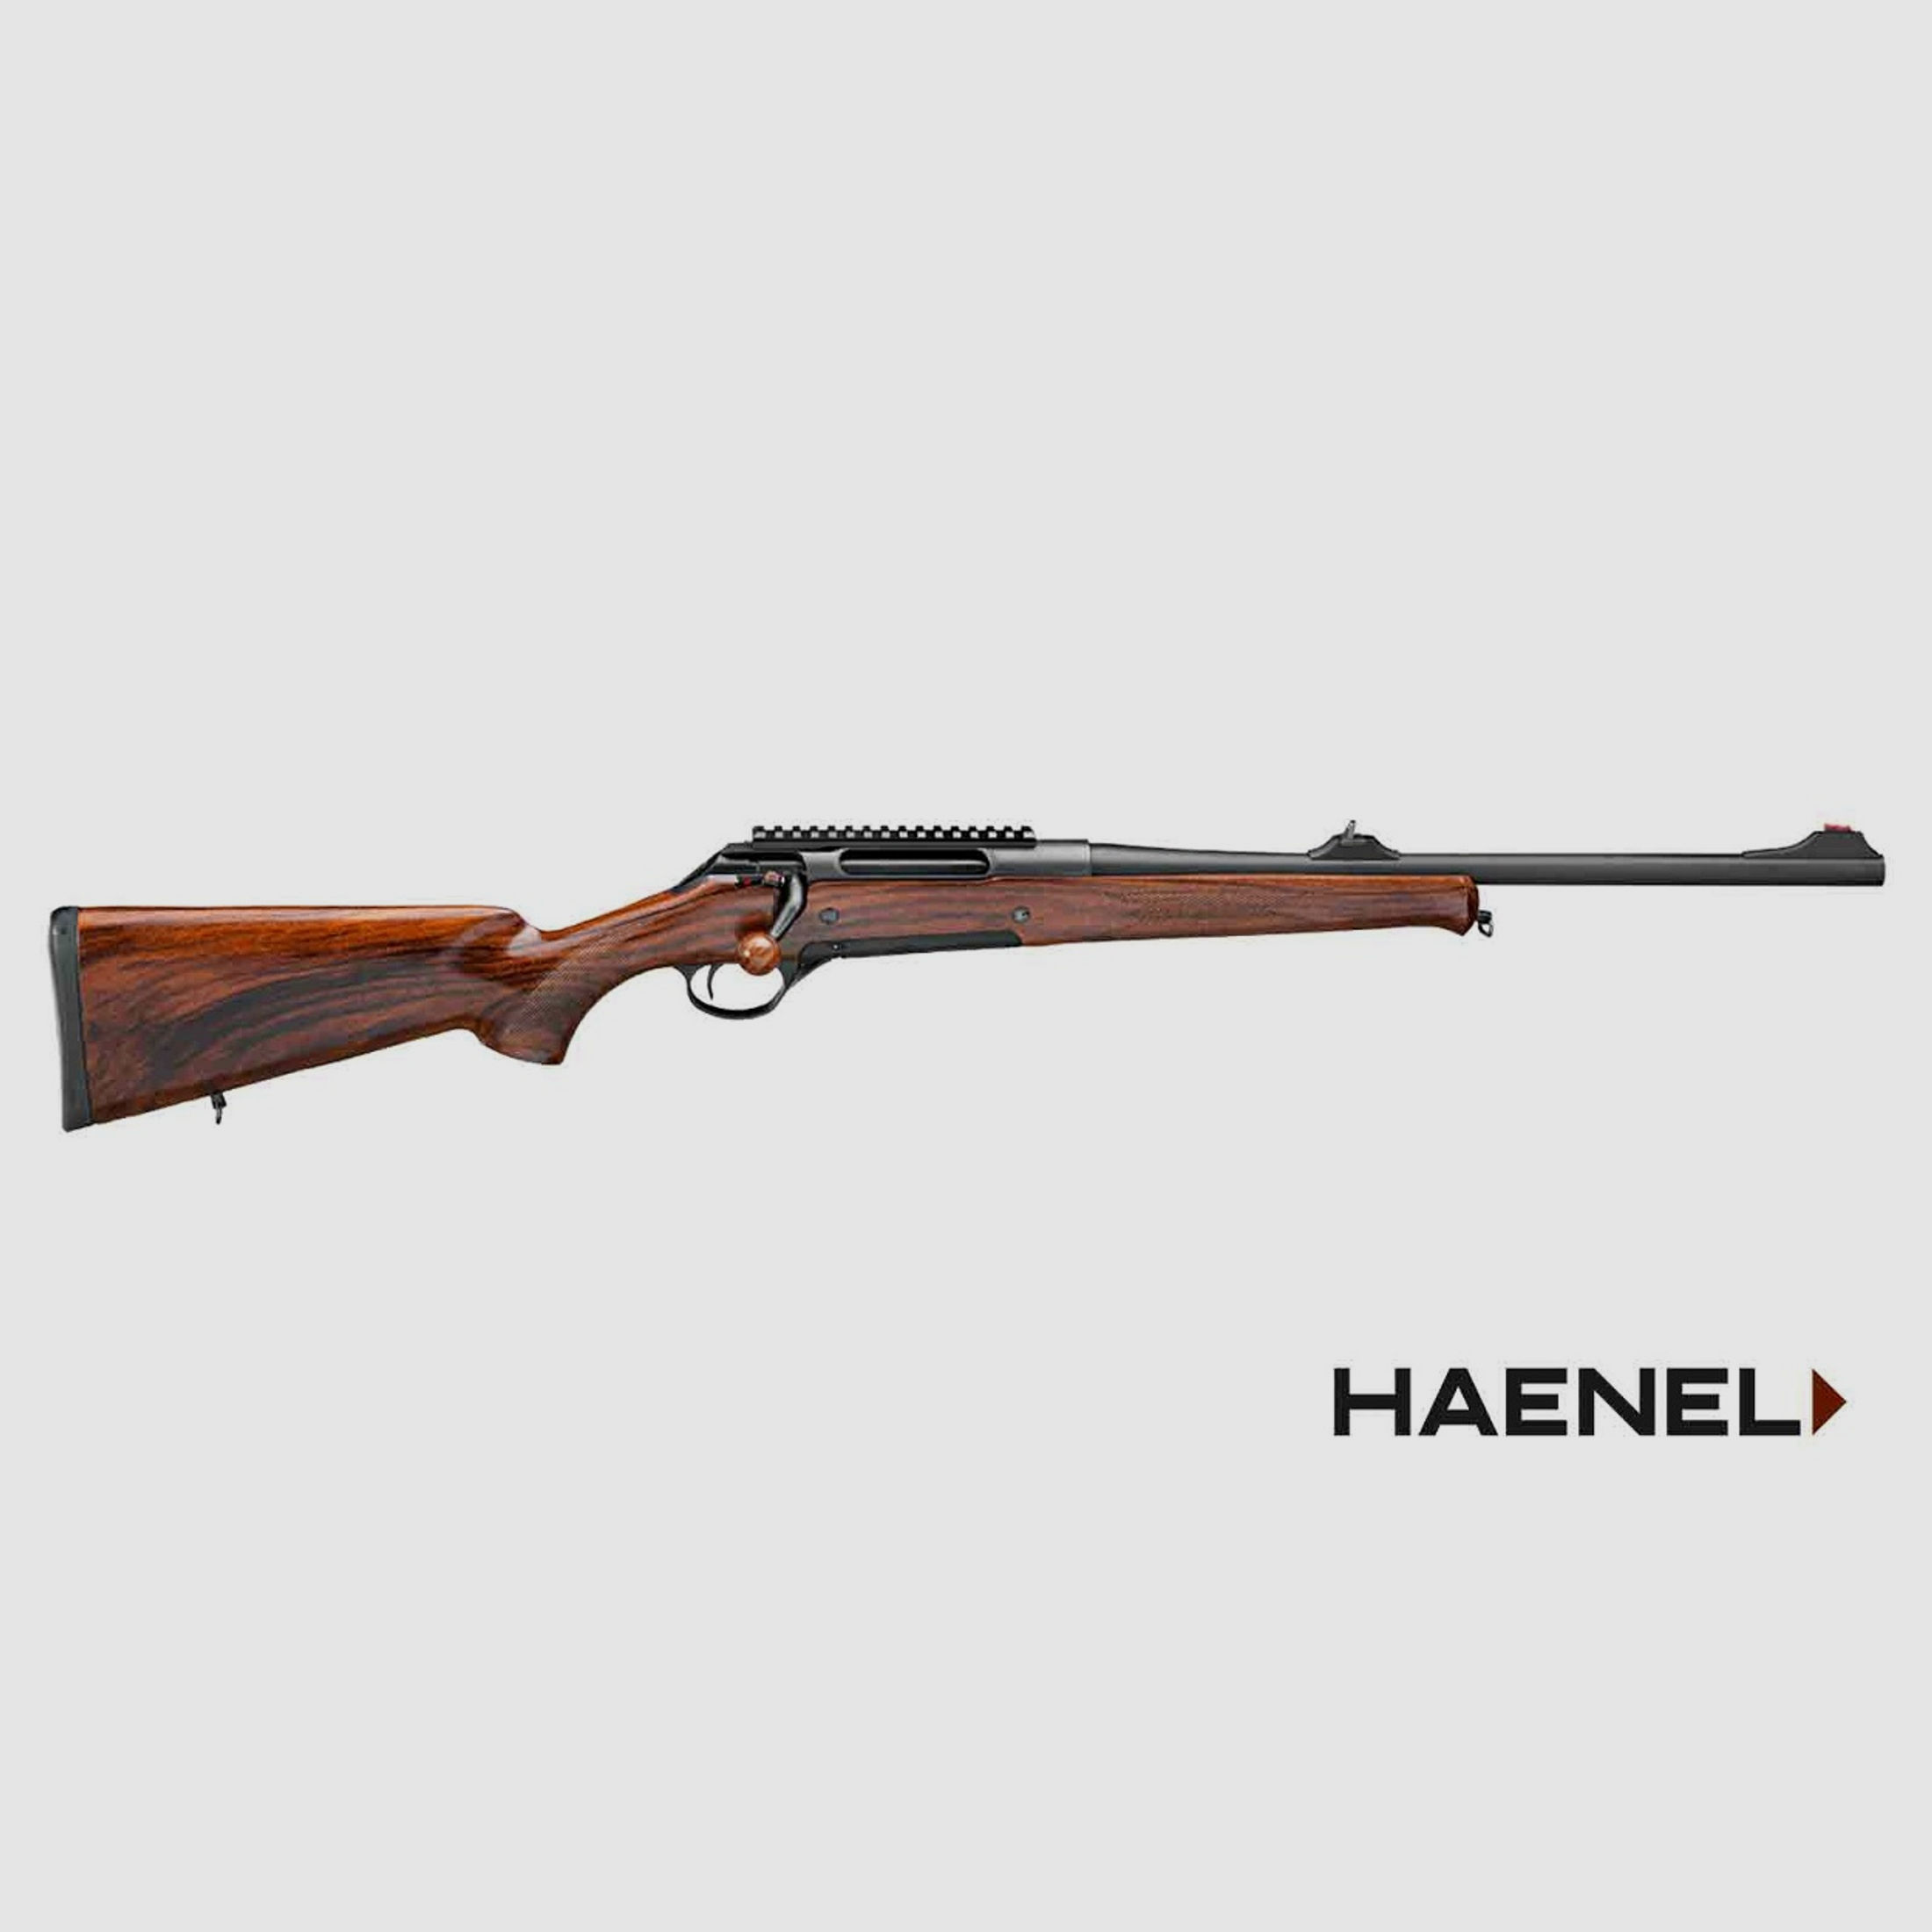 Haenel Repetierbüchse Mod. JAEGER 10 Timber Compact .223Rem